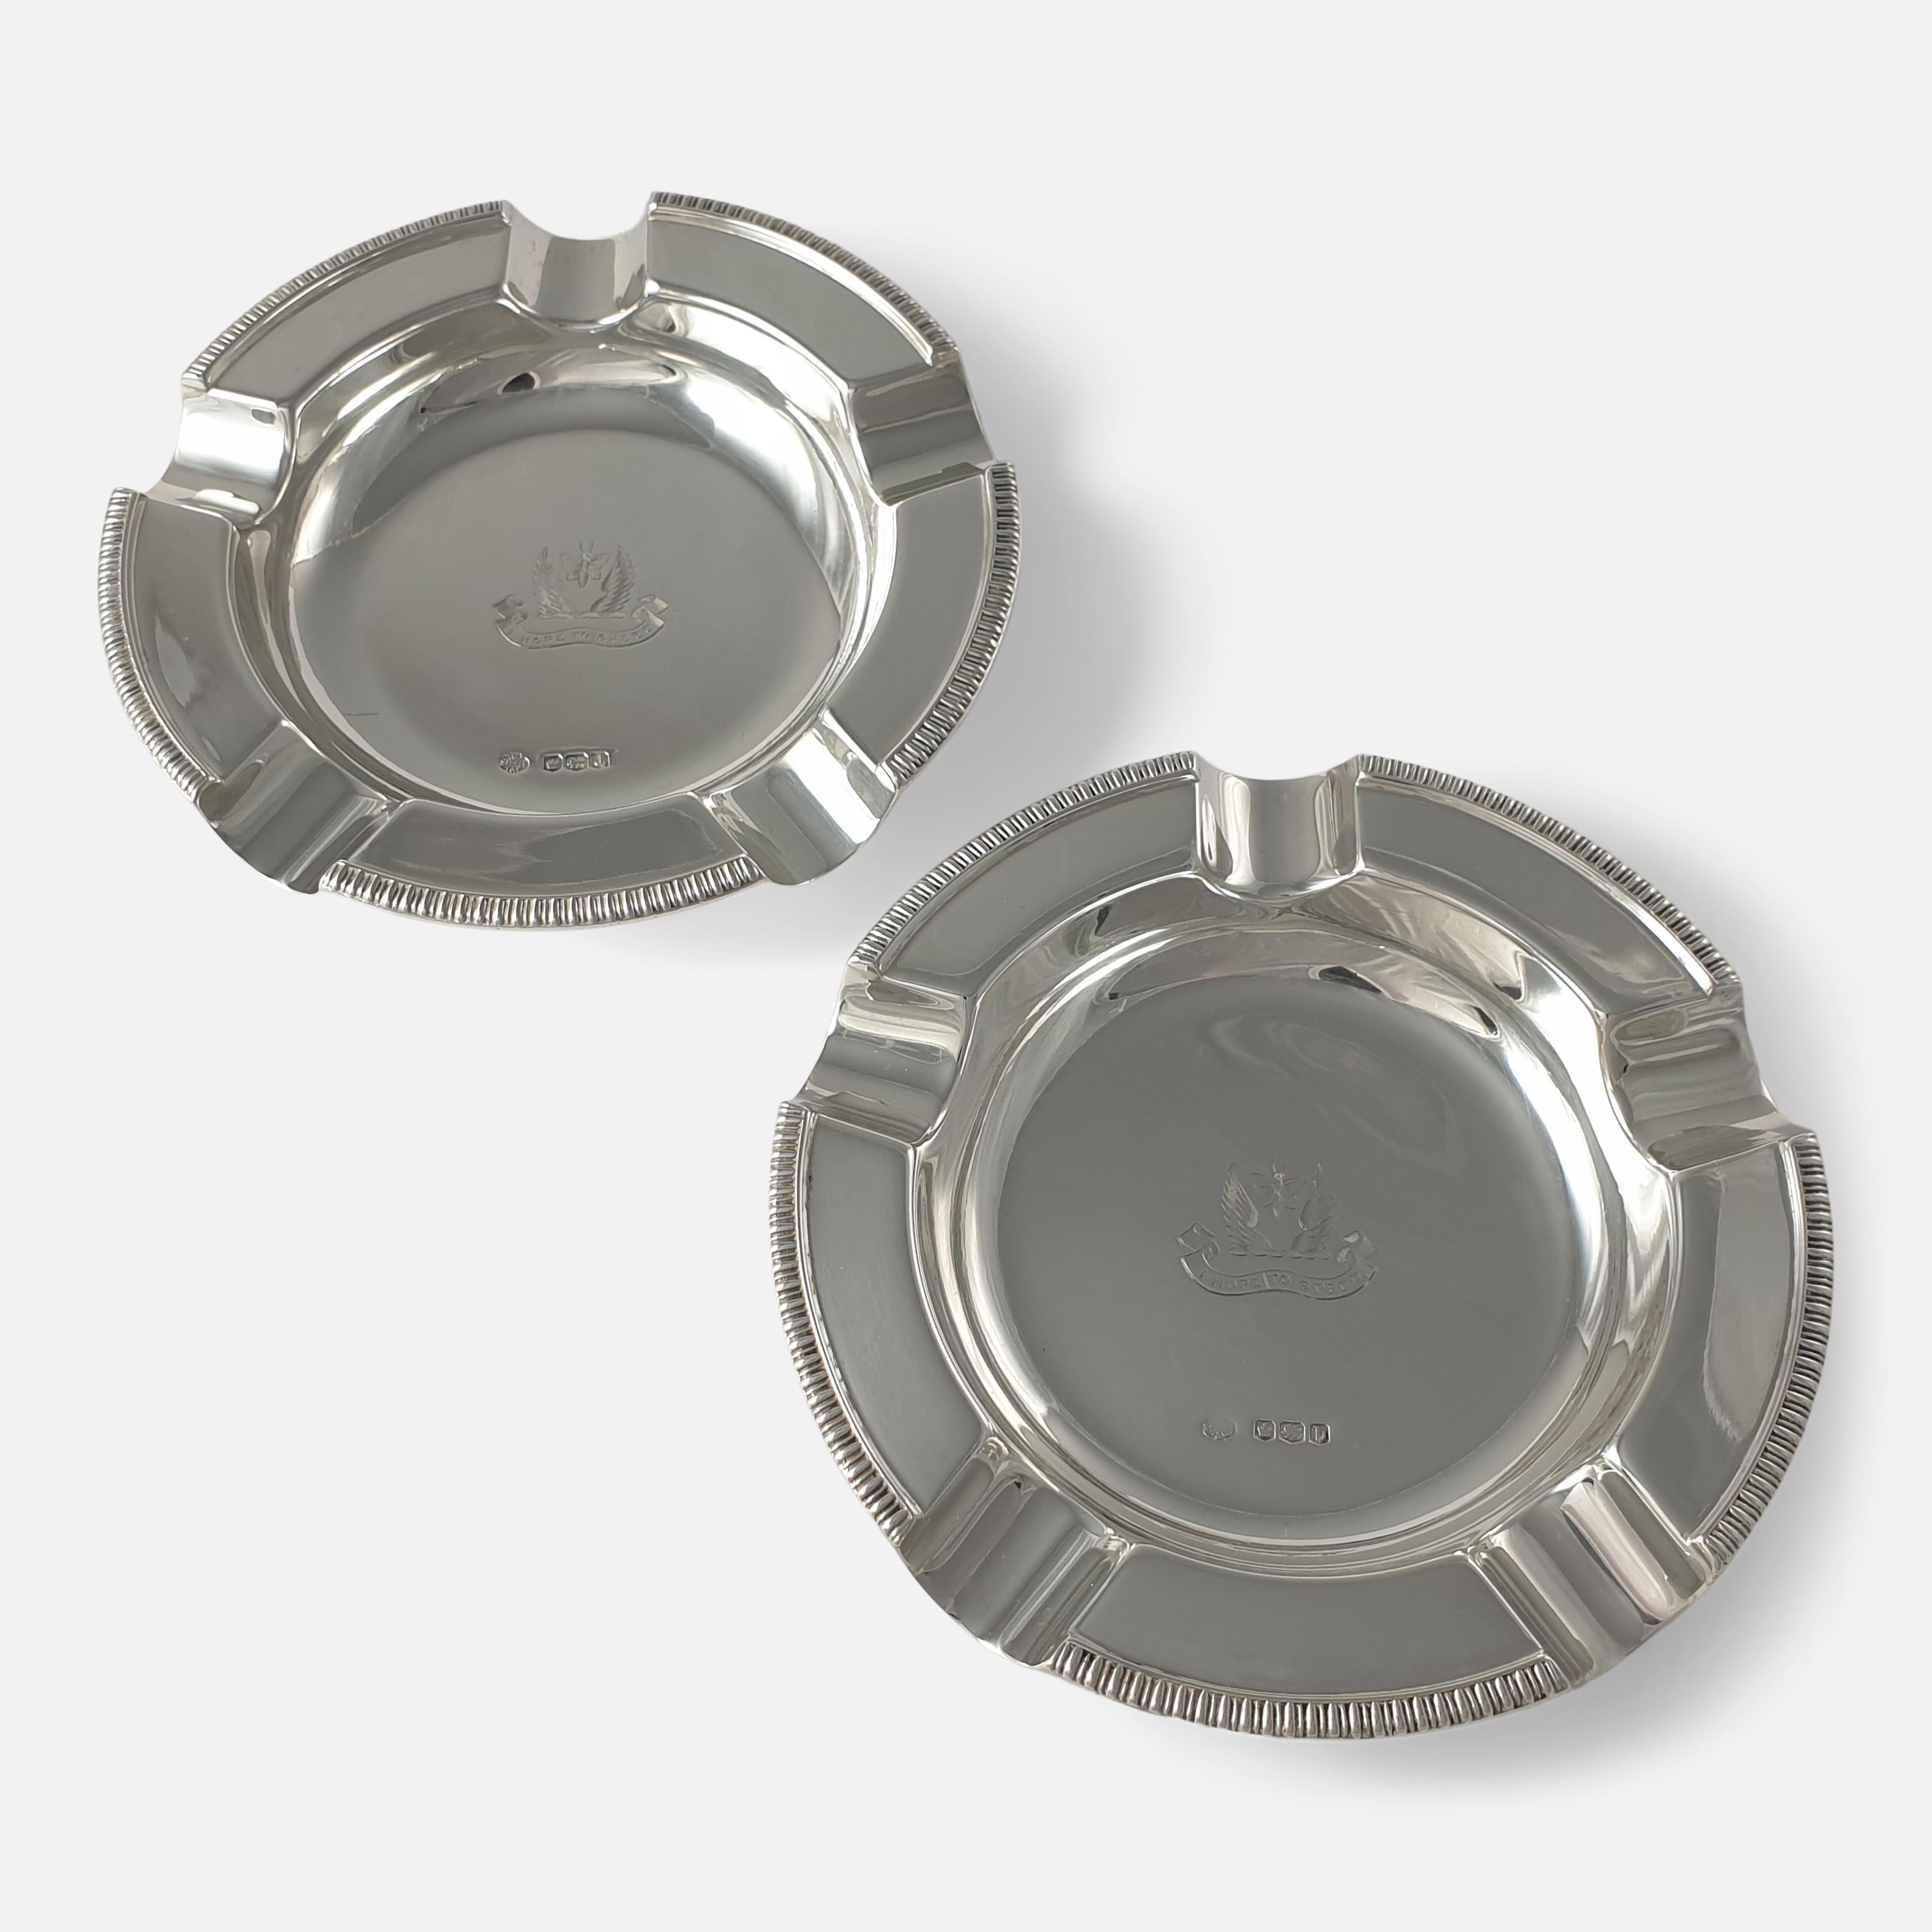 British Pair of Sterling Silver Crested Ashtrays, William Hutton & Sons For Sale